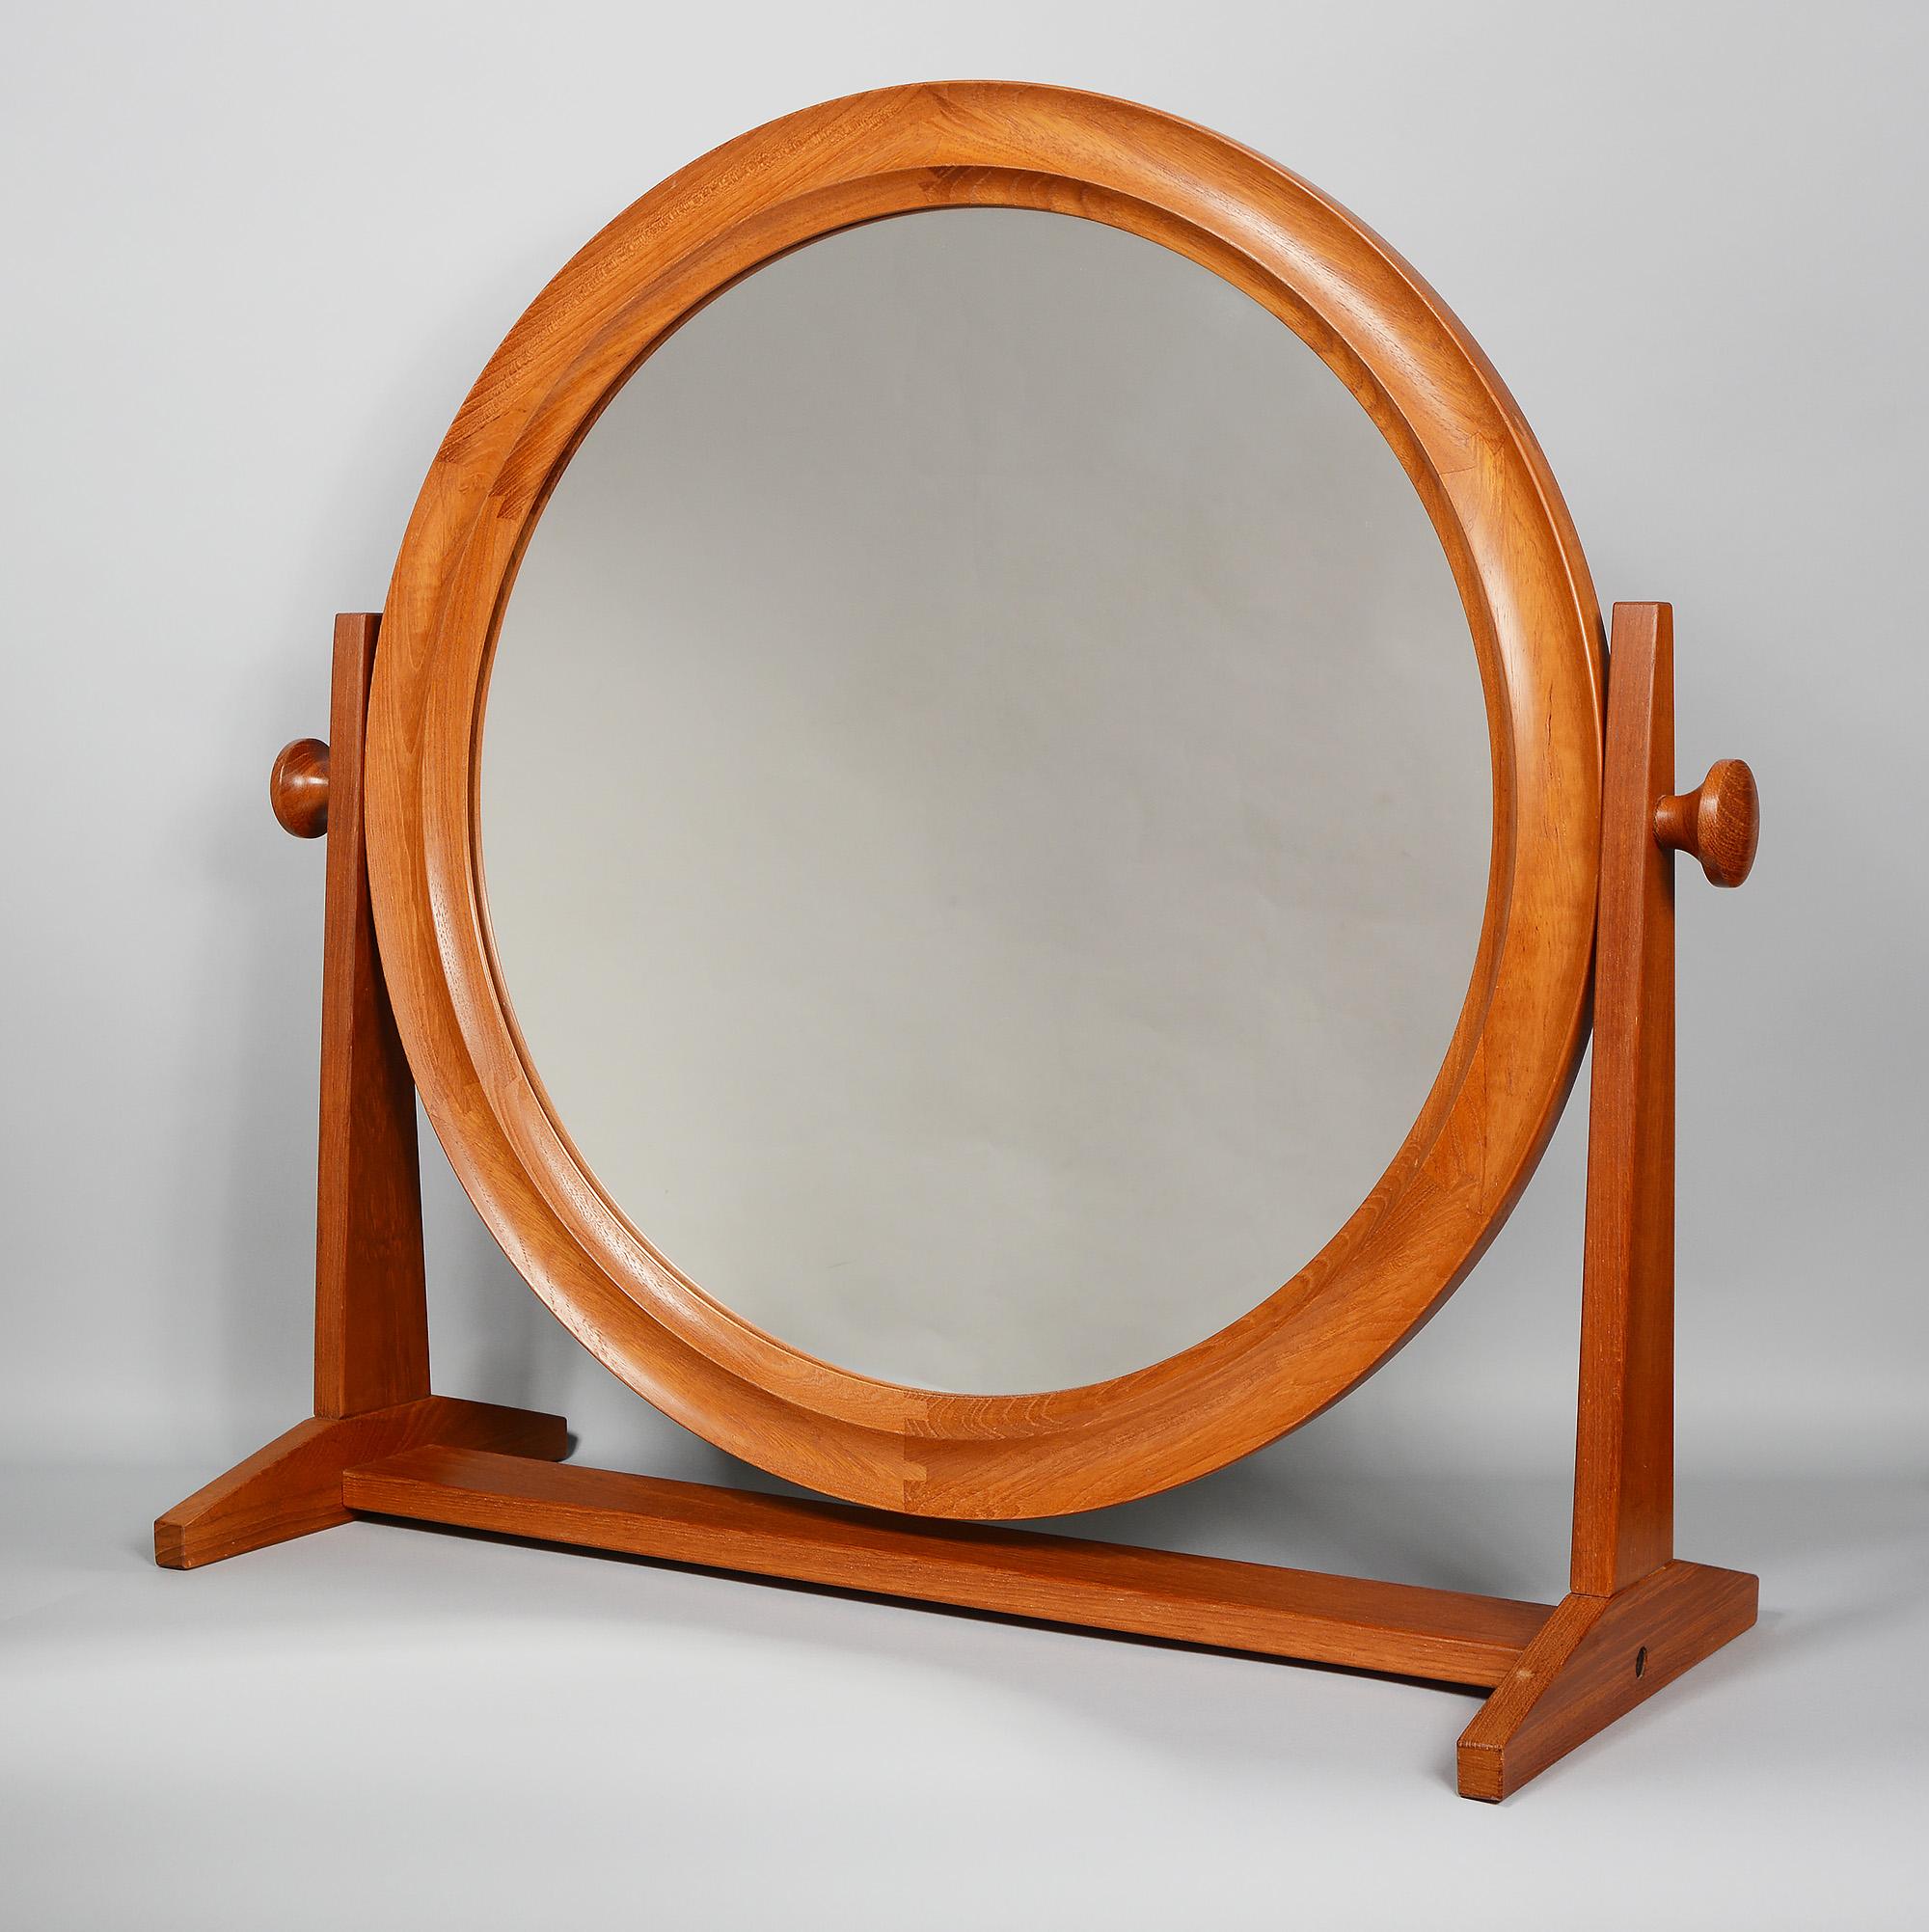 Large table top cheval mirror by Pedersen & Hansen. The glass portion is 19.5 inches in diameter and the frame with the knobs is 28 inches wide. The frame is made of teak. The mirror frame has great finger joint details. The mirror can tilt up or